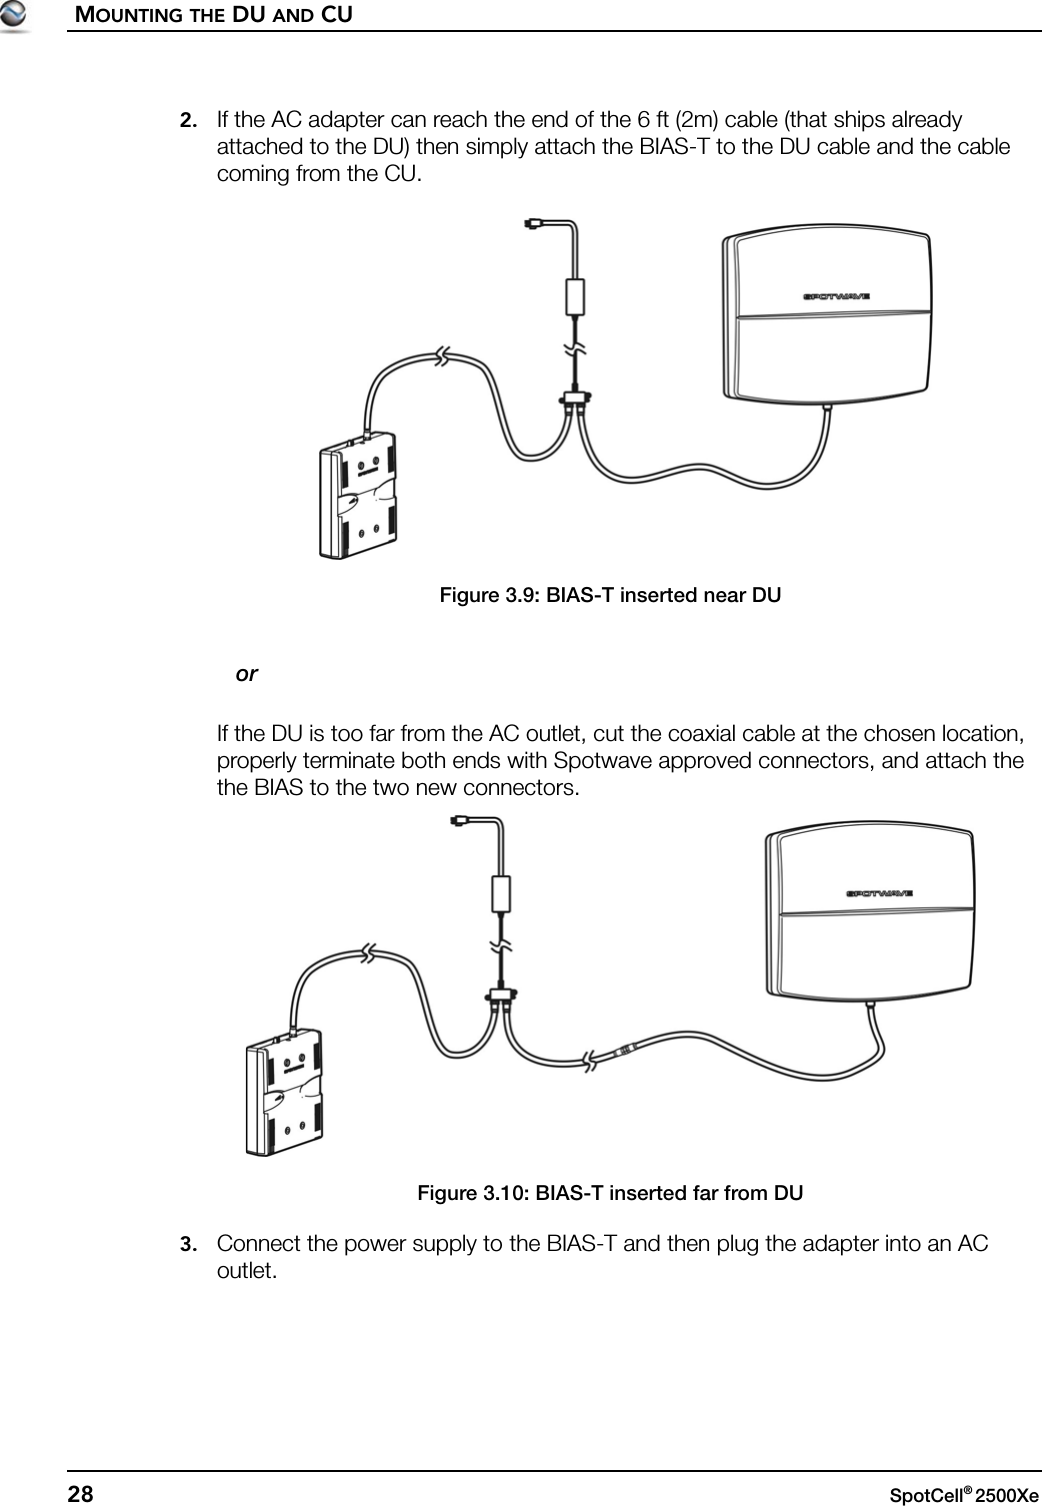 MOUNTING THE DU AND CU28 SpotCell® 2500Xe 2. If the AC adapter can reach the end of the 6 ft (2m) cable (that ships already attached to the DU) then simply attach the BIAS-T to the DU cable and the cable coming from the CU.Figure 3.9: BIAS-T inserted near DU   orIf the DU is too far from the AC outlet, cut the coaxial cable at the chosen location, properly terminate both ends with Spotwave approved connectors, and attach the the BIAS to the two new connectors.Figure 3.10: BIAS-T inserted far from DU3. Connect the power supply to the BIAS-T and then plug the adapter into an AC outlet.